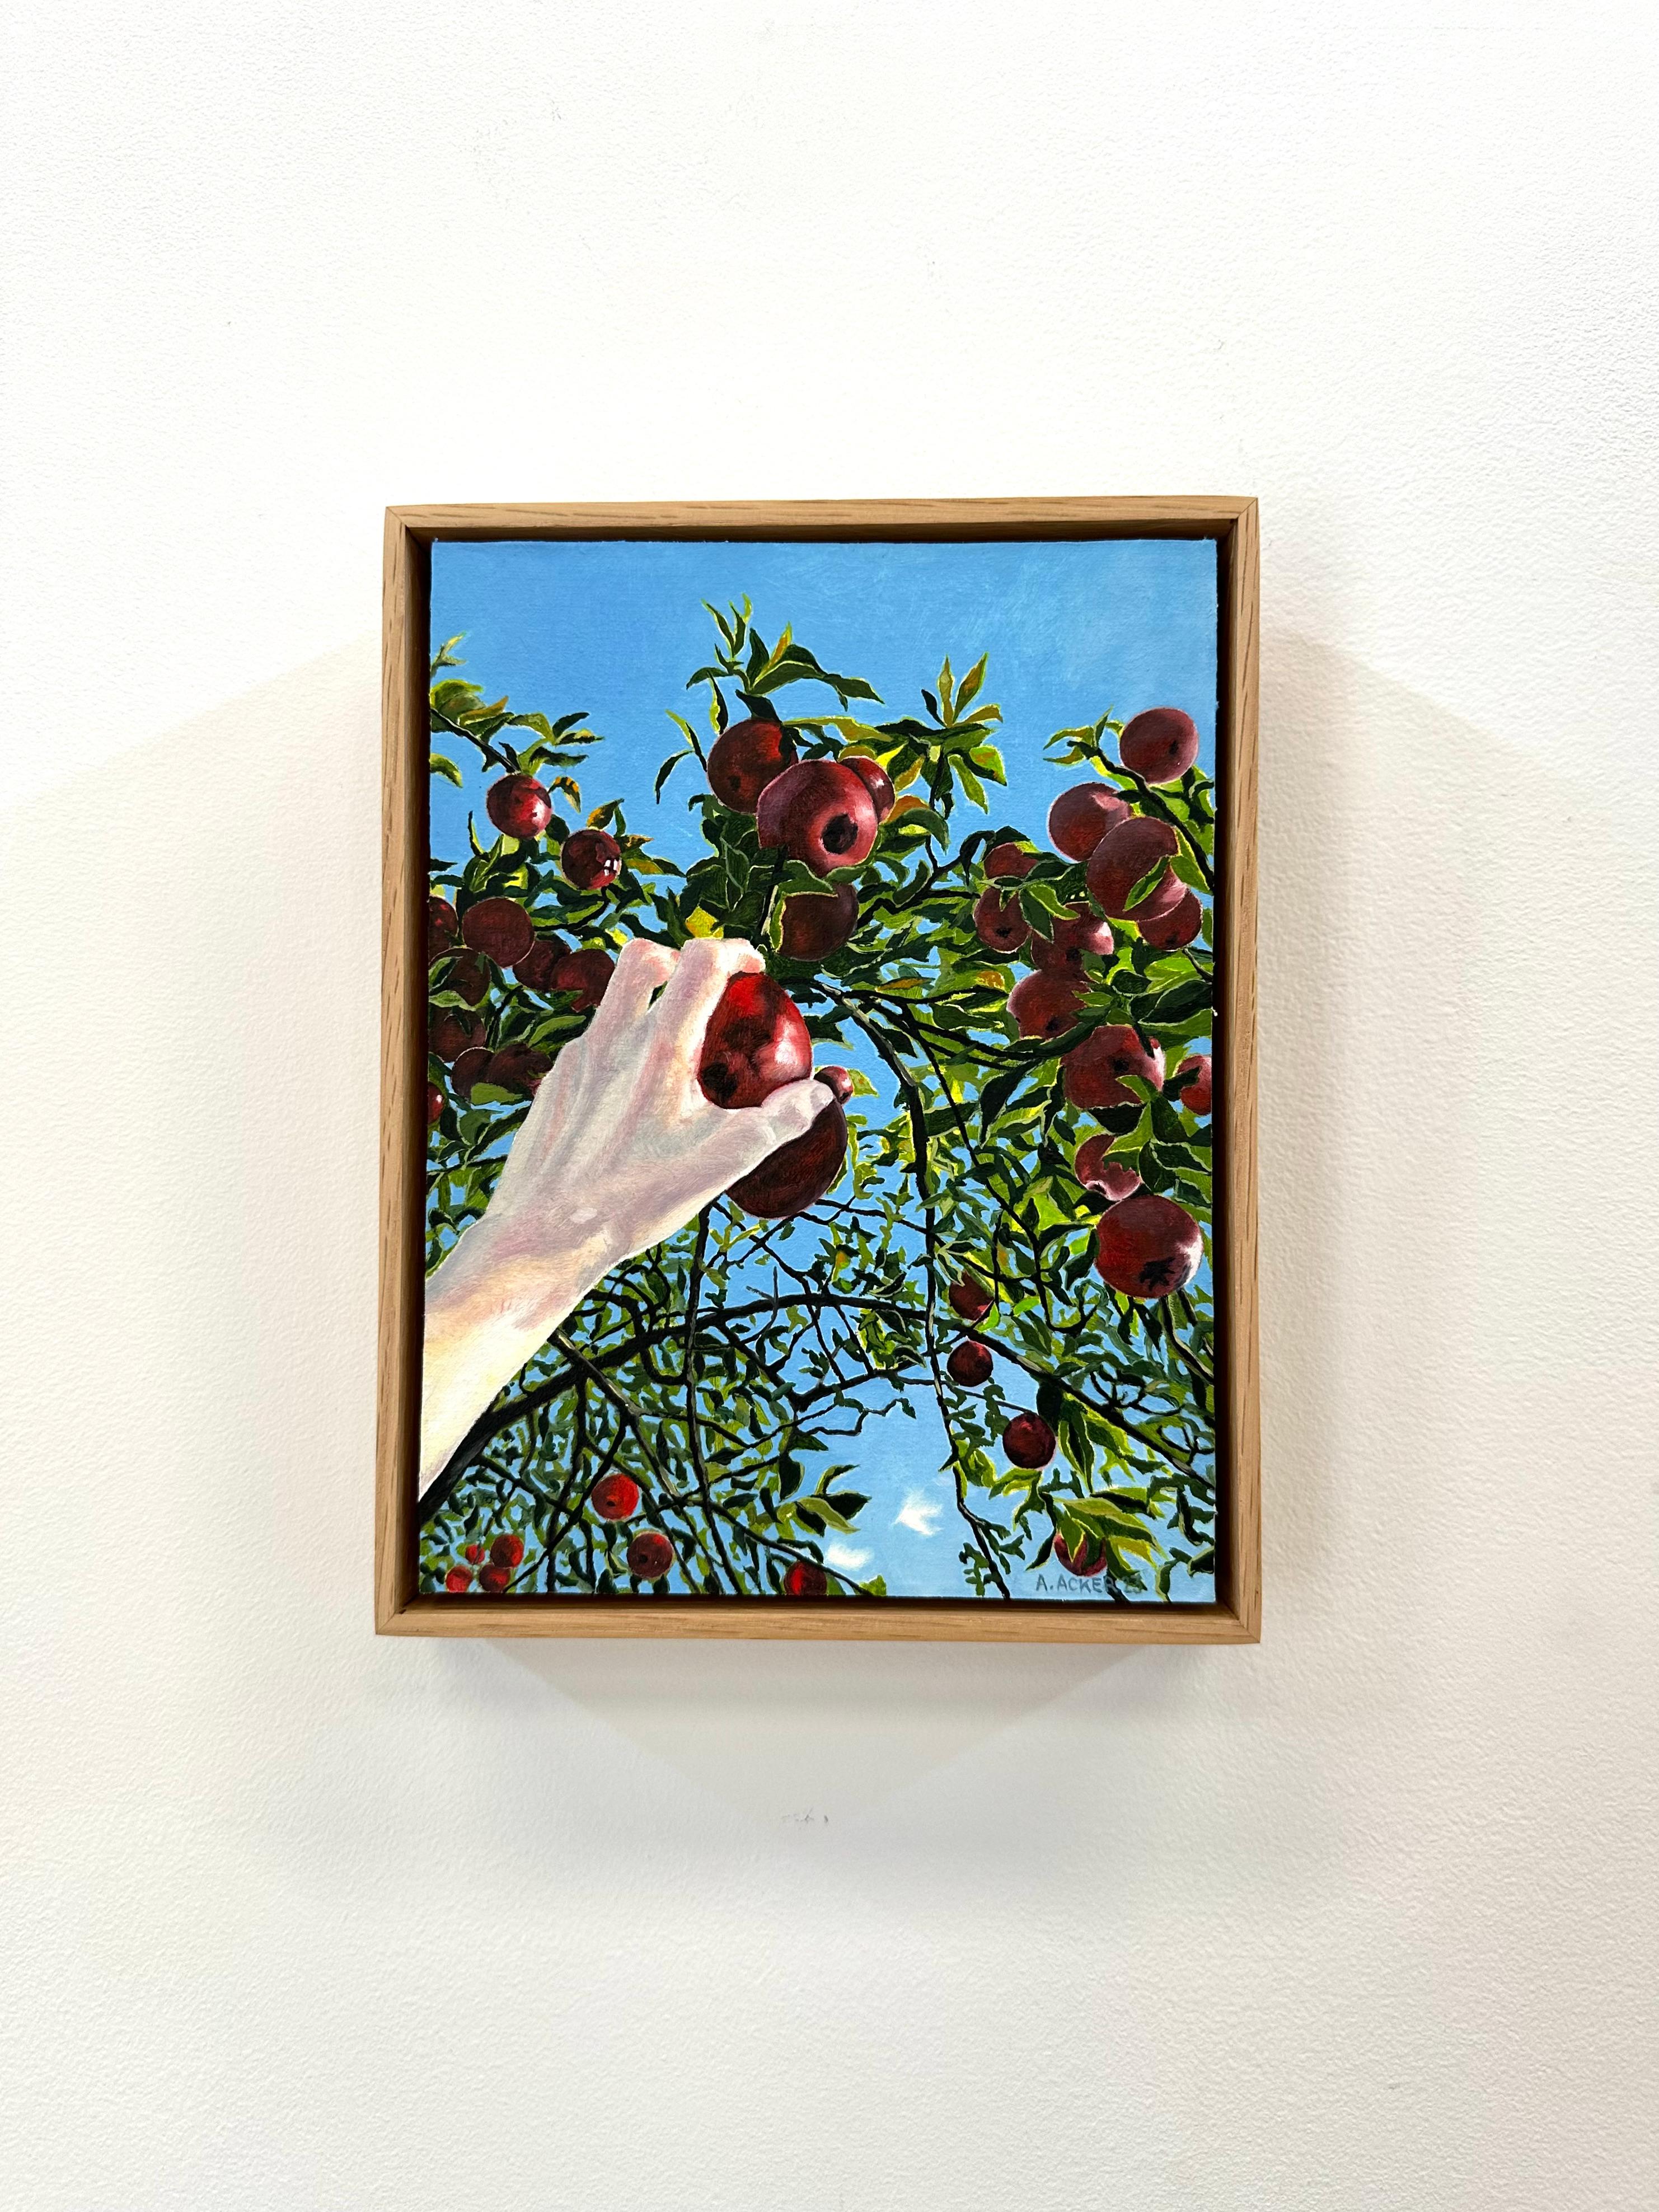 Apple Picking, Hand Reaching for Red Fruit, Green Leaves, Tree, Blue Sky, Fall - Painting by Amanda Acker